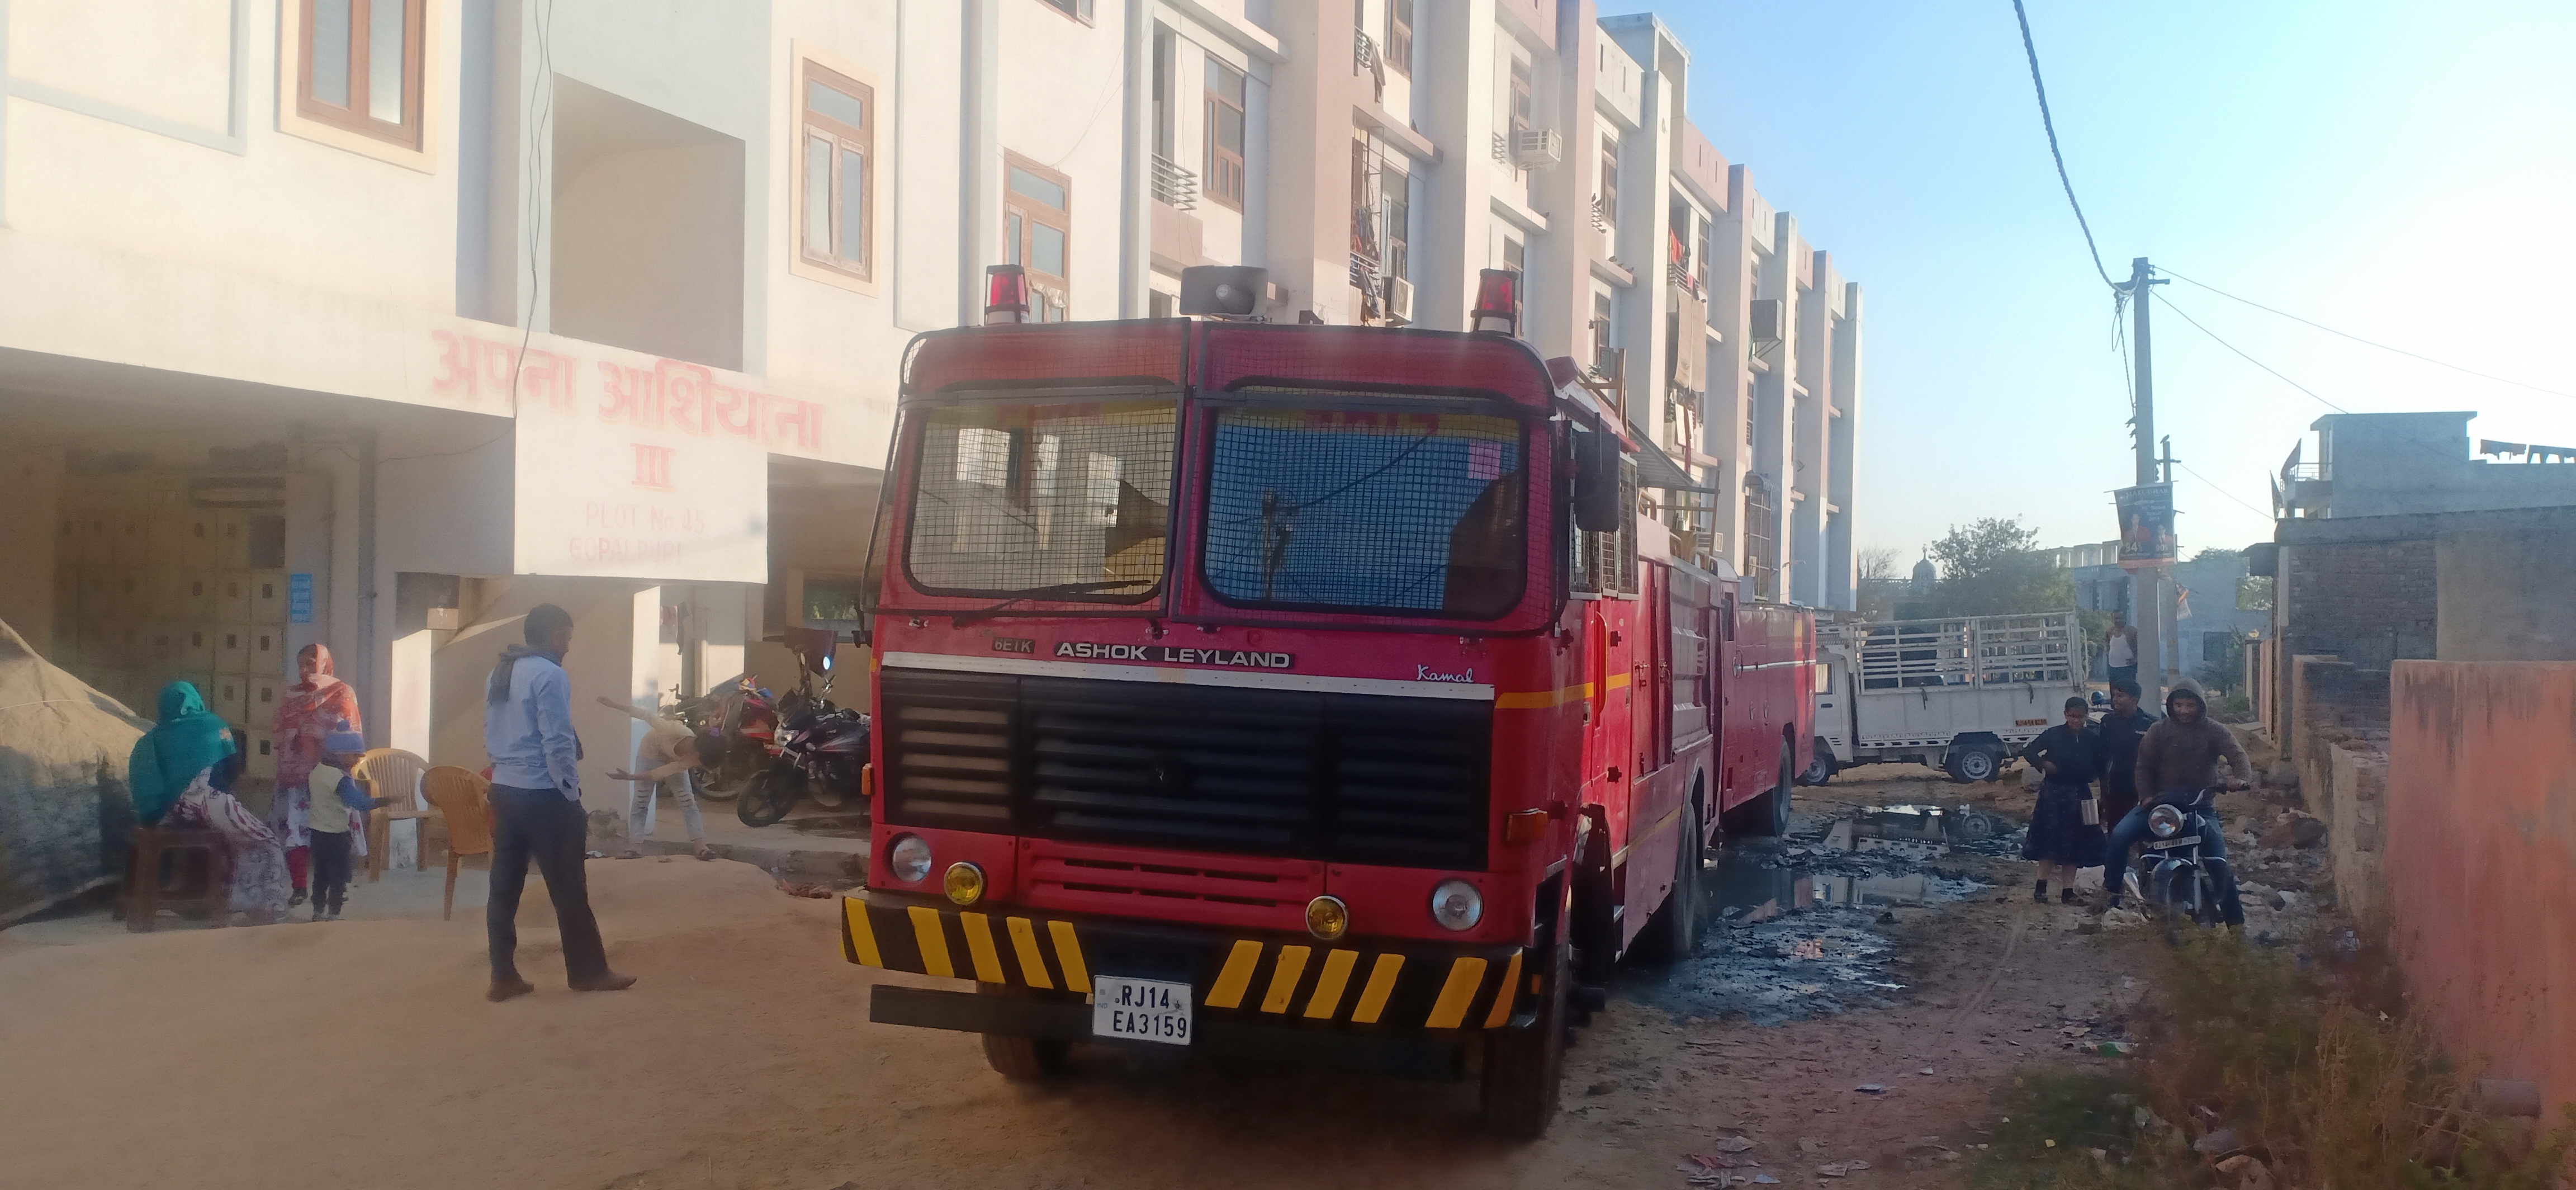 Fire In Flat In Jaipur : Fire In Jaipur : Fire In Jaipur Today